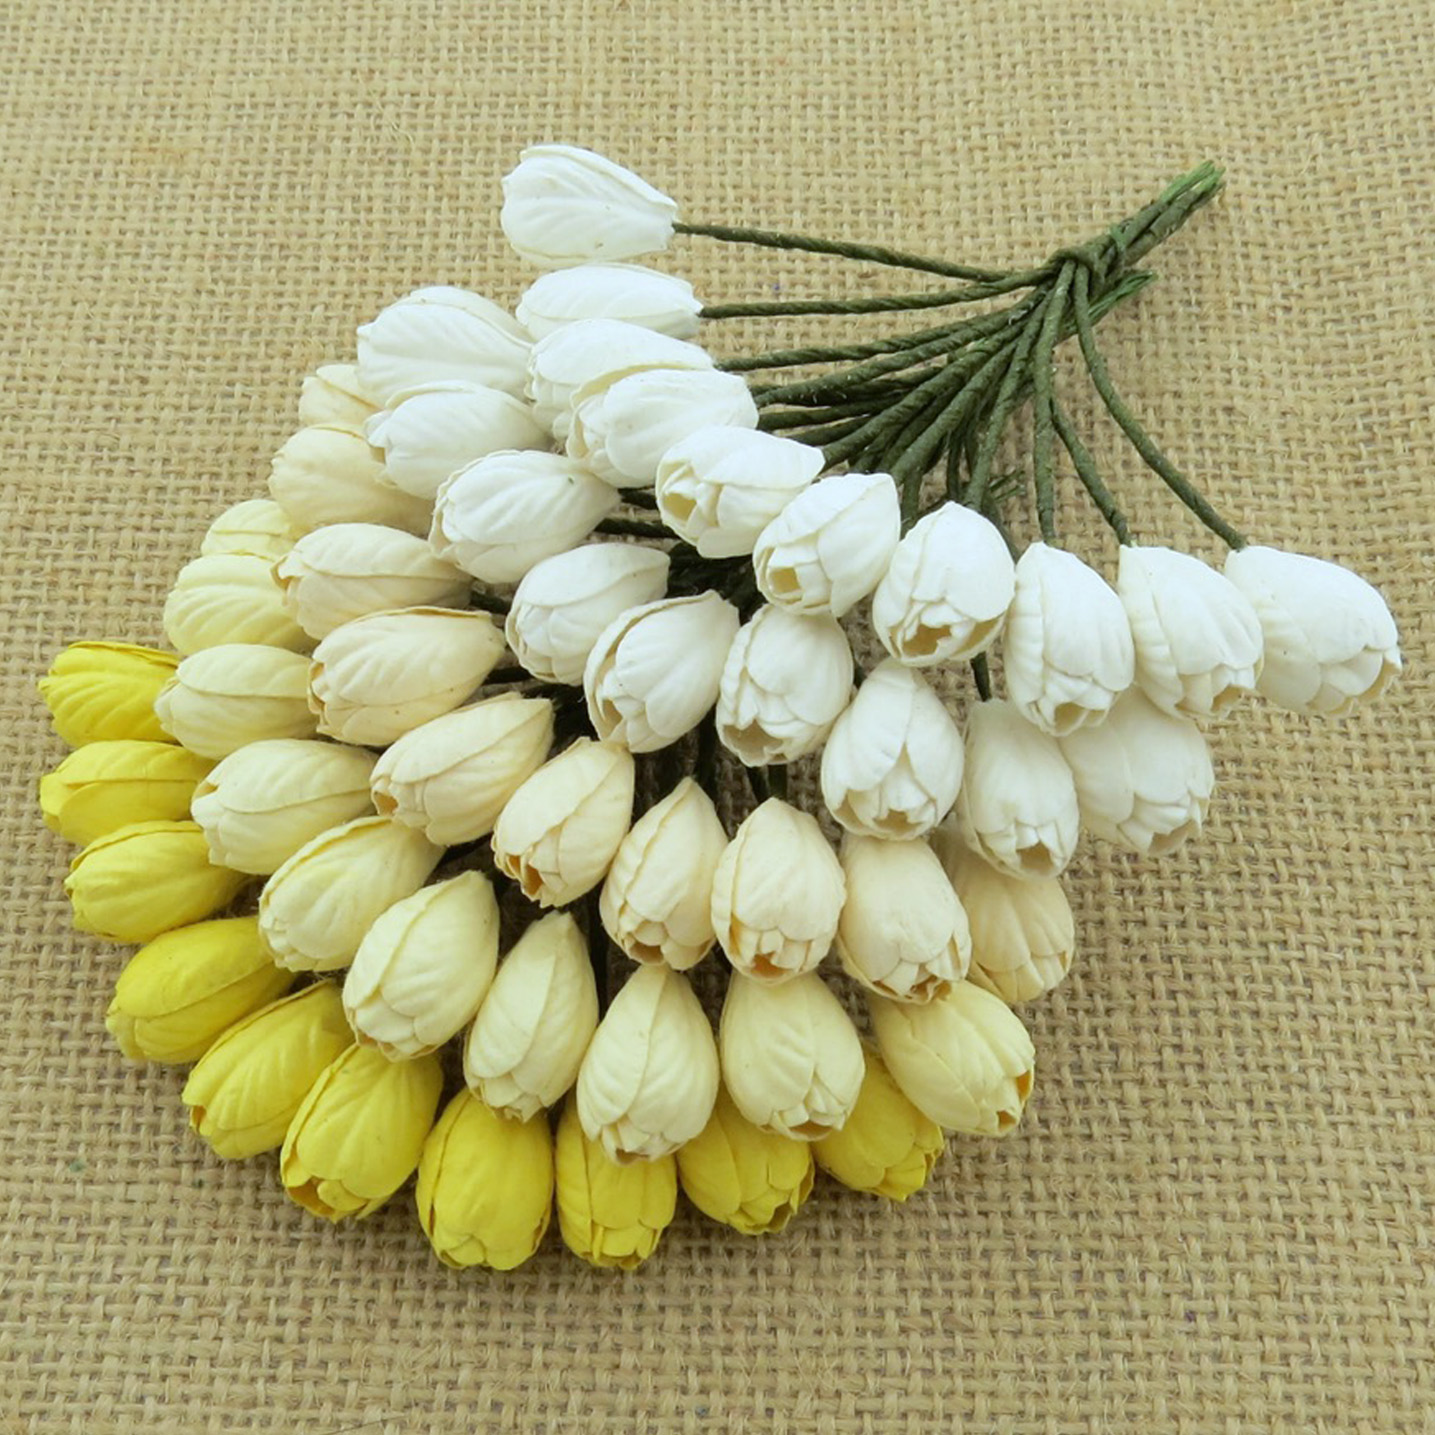 50 MIXED WHITE/CREAM TONE MULBERRY PAPER TULIP FLOWERS - 5 COLOR